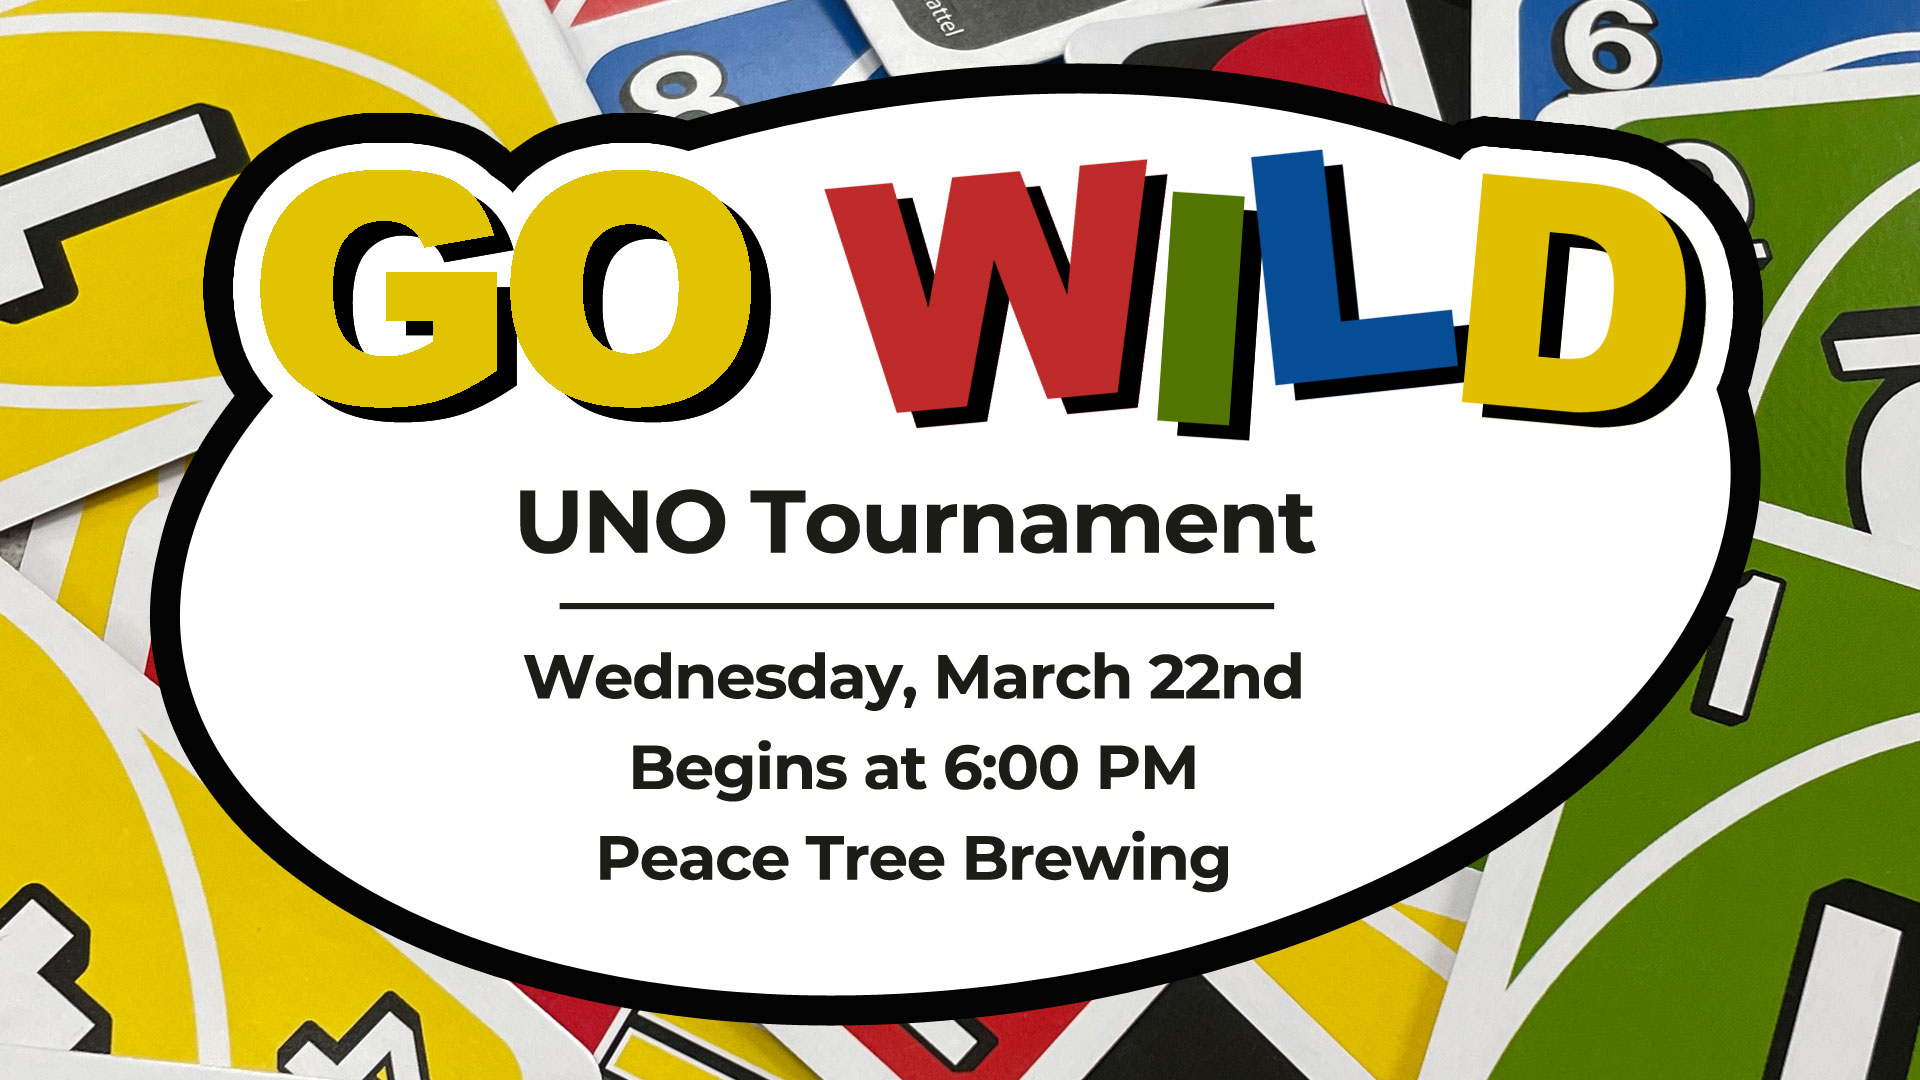 Go Wild Uno Tournament at Peace Tree Brewing March 22, 2023 Event Image